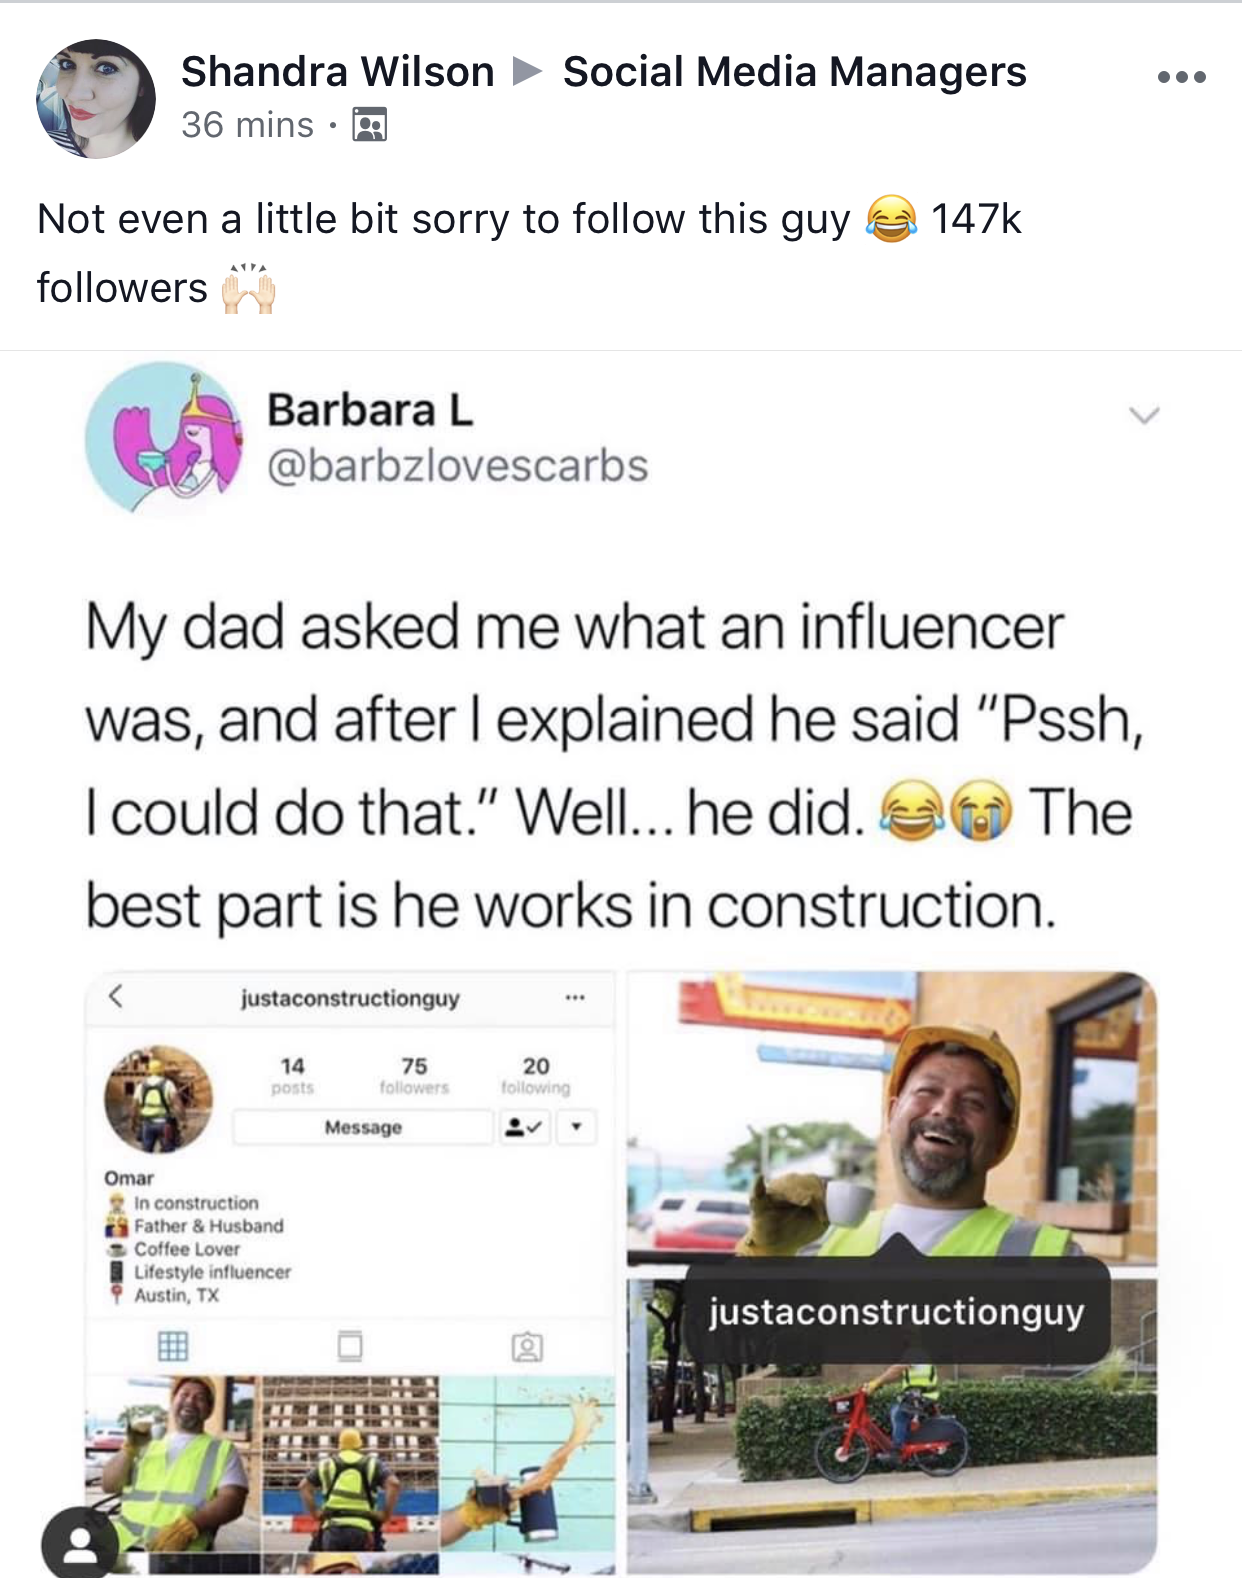 We can't get enough of JustAConstructionGuy on Instagram